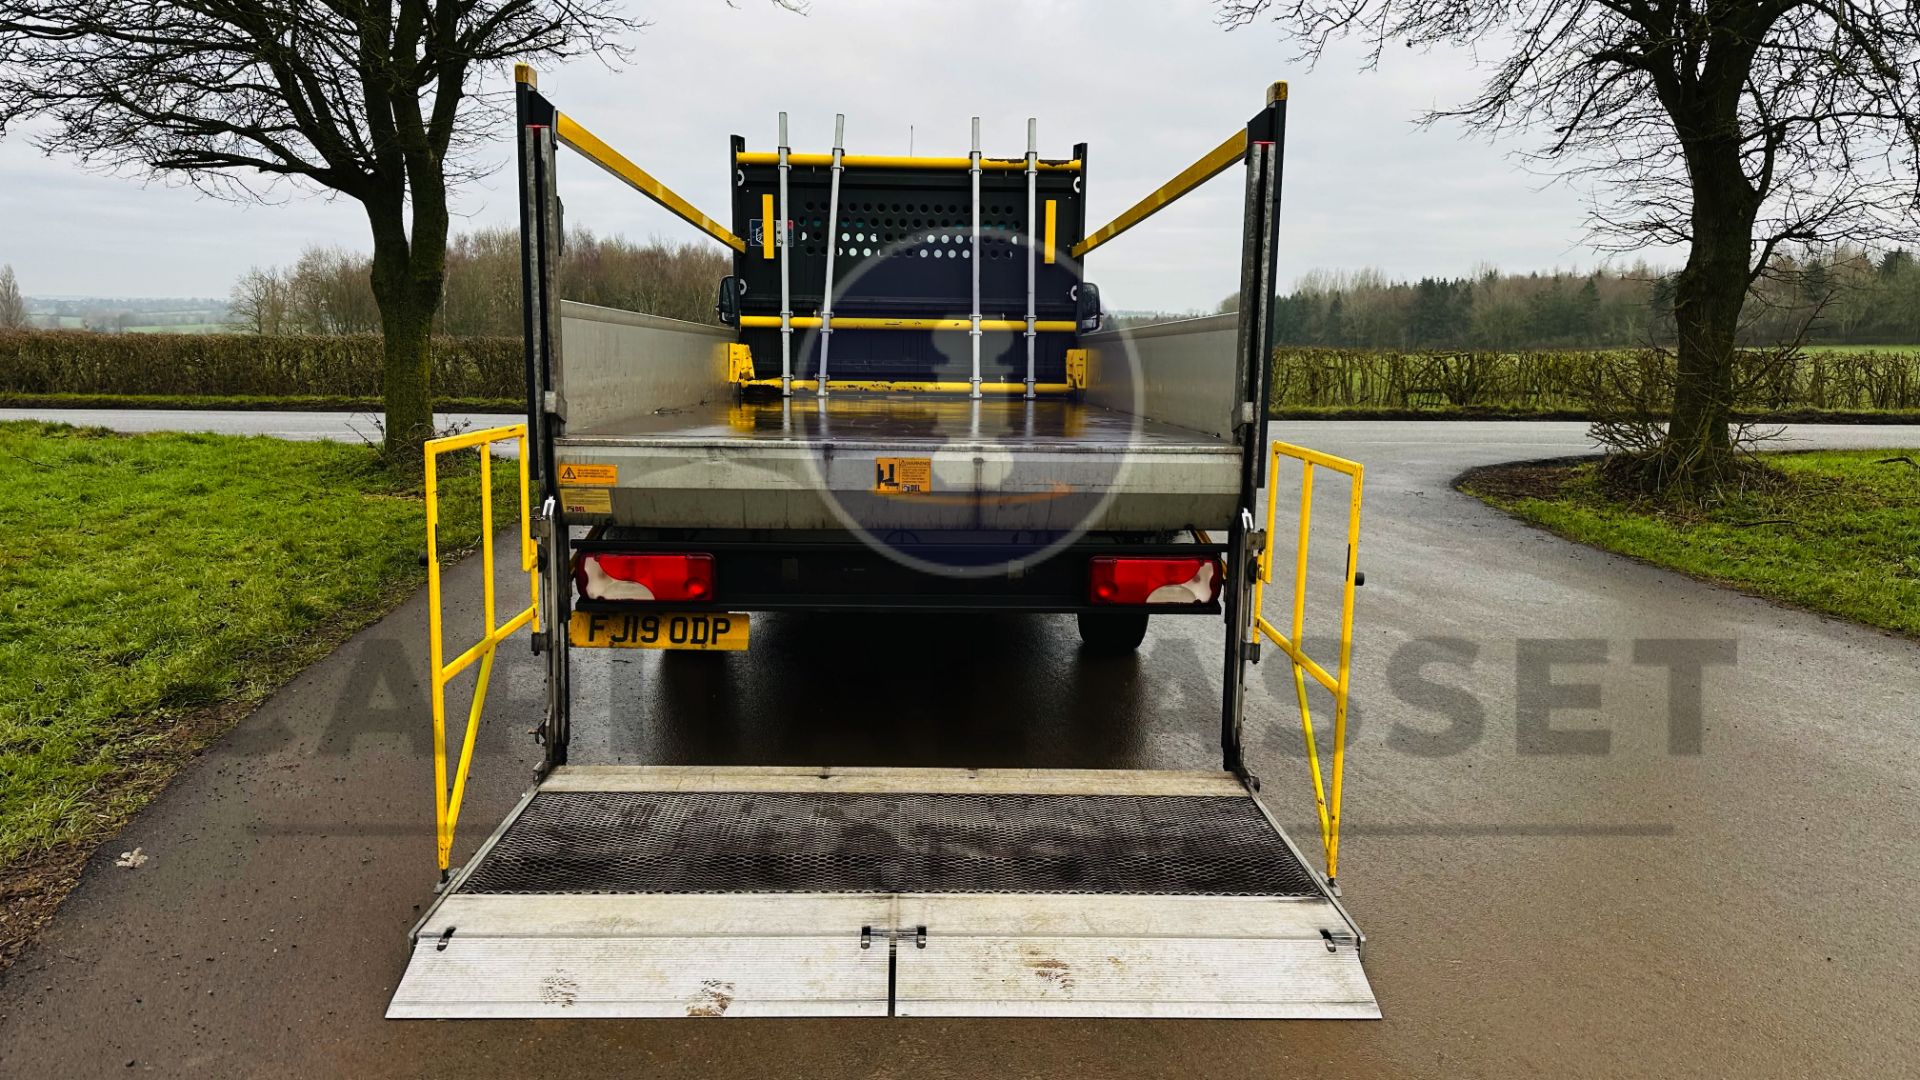 MERCEDES-BENZ SPRINTER 314 CDI *LWB - DROPSIDE* (2019 - EURO 6) AUTOMATIC *TAIL-LIFT* (3500 KG) - Image 23 of 40